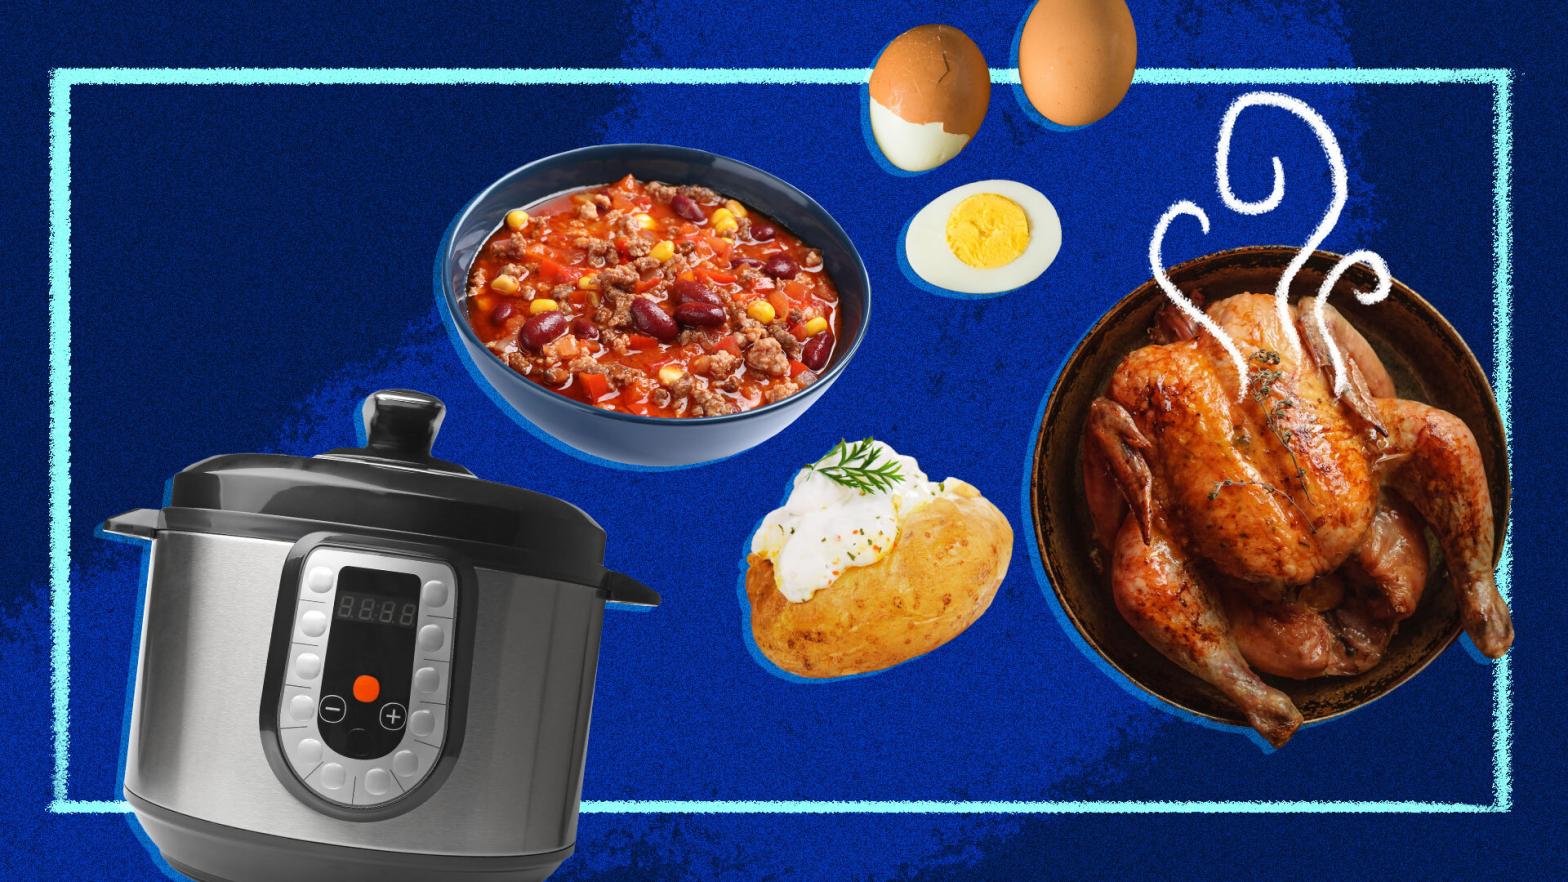 The 8 Things You Should Make With a New Instant Pot